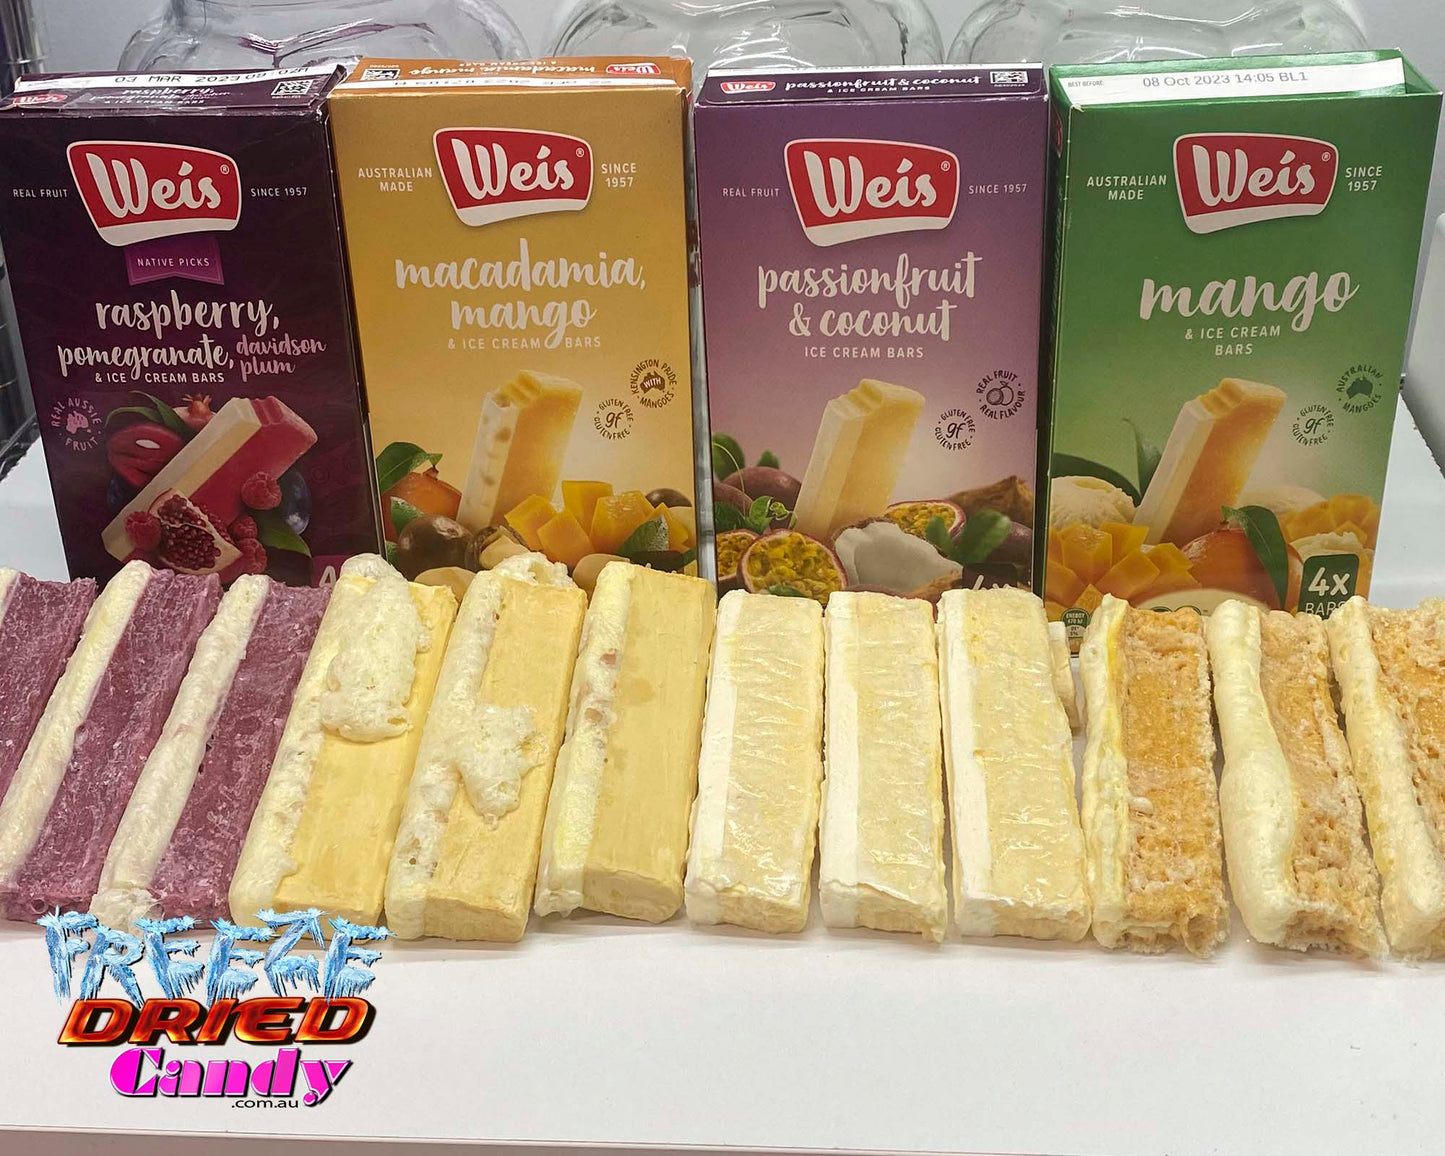 Freeze Dried Ice Cream WEIS® Bars - Weis  bar is so unique, authentic, and perfectly balanced by a layer of traditional Weis ice cream. One bite and you're sure to be delighted. Fruit and cream are soulmates. Put them together with delicious natural ingredients, and you’ve got heaven in a Weis Bar. The two-toned Classic Weis Bars, a moreish combination of real fruit and their traditional cream strip, are an irresistible indulgence.